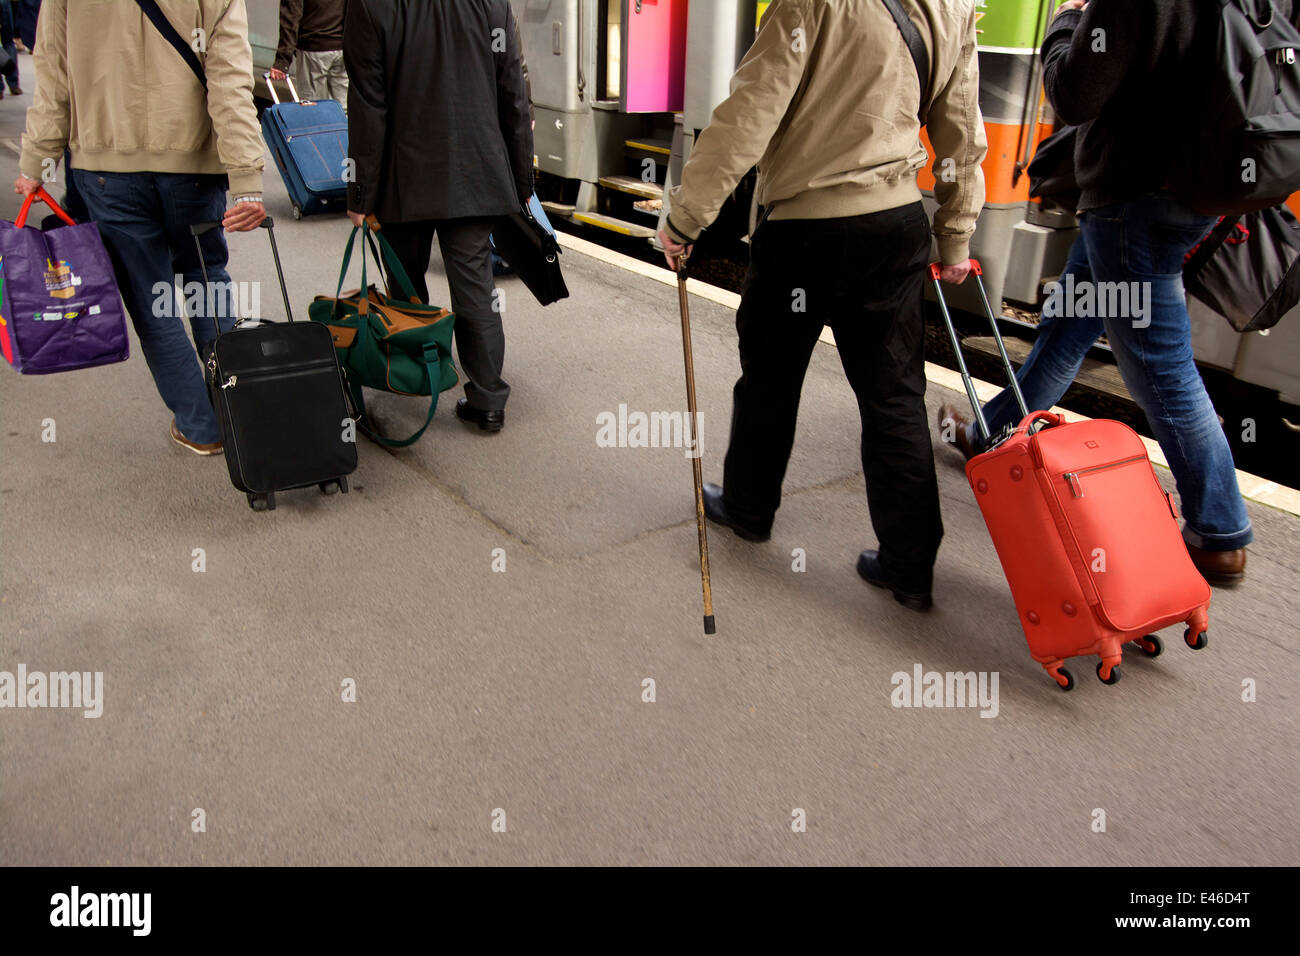 Pensioners going on holiday at a train station Stock Photo